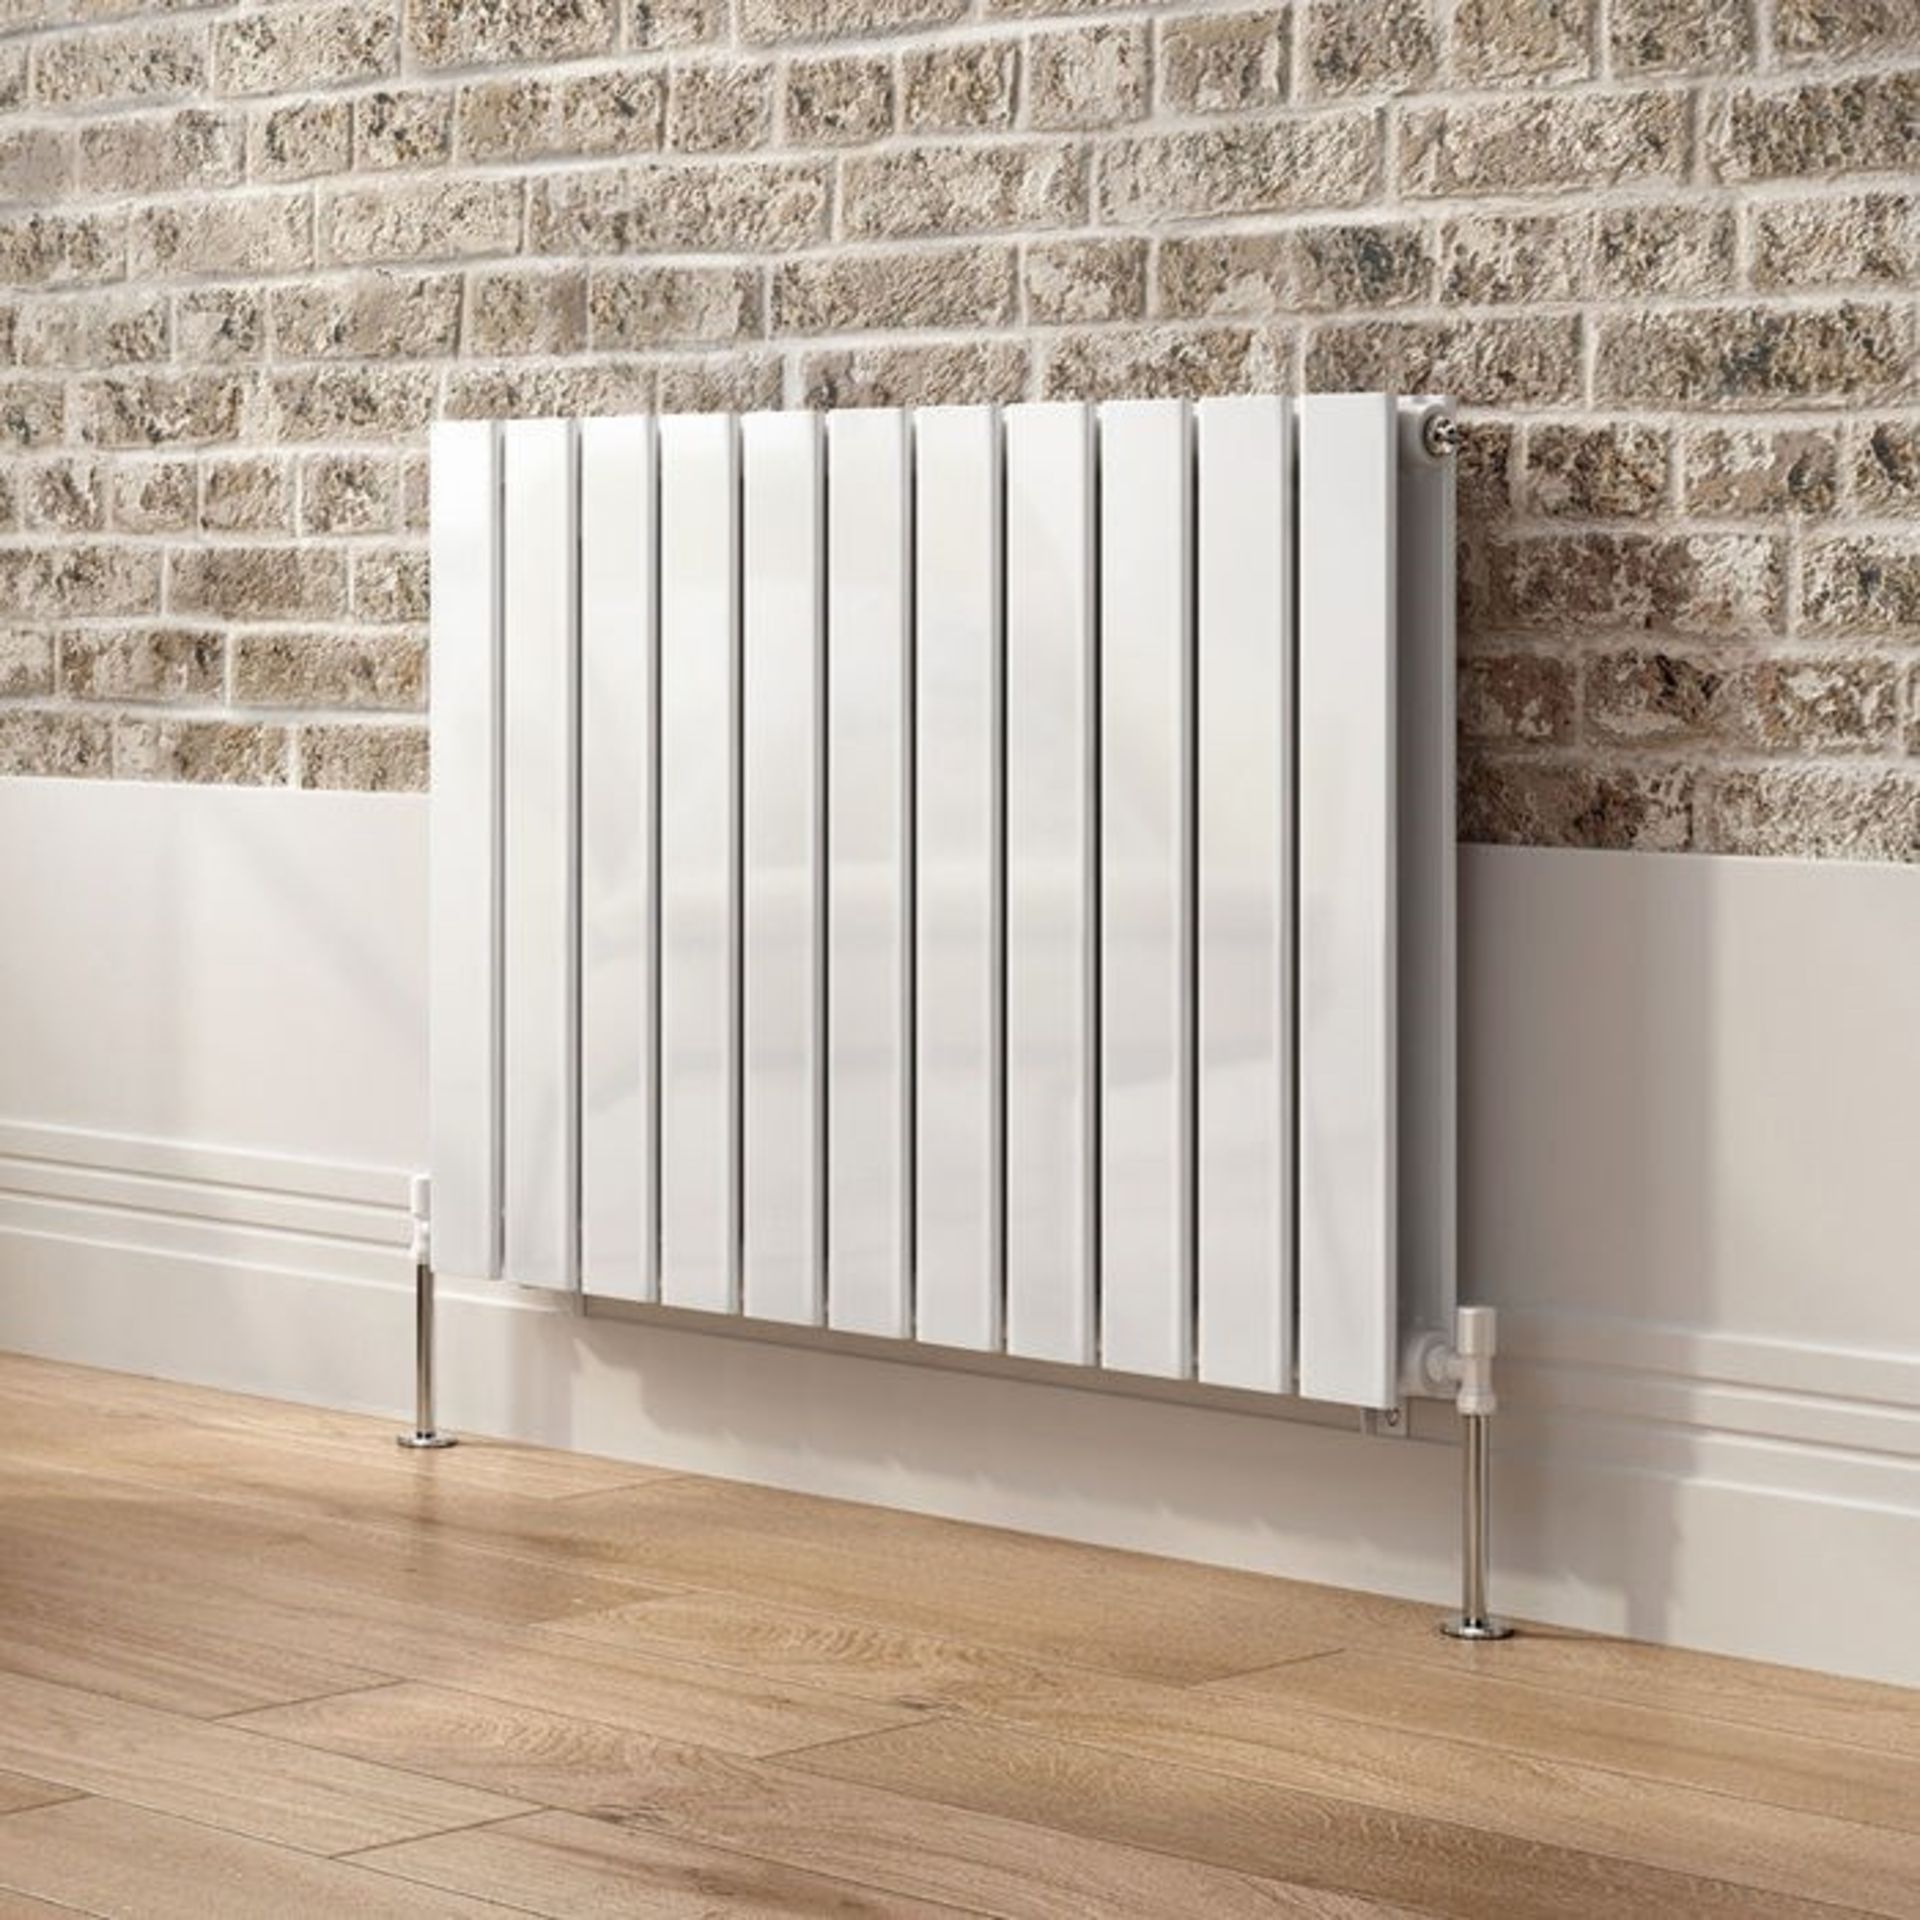 600x830mm Gloss White Double Flat Panel Horizontal Radiator. RRP £474.99.RC221.Made with high... - Image 2 of 3